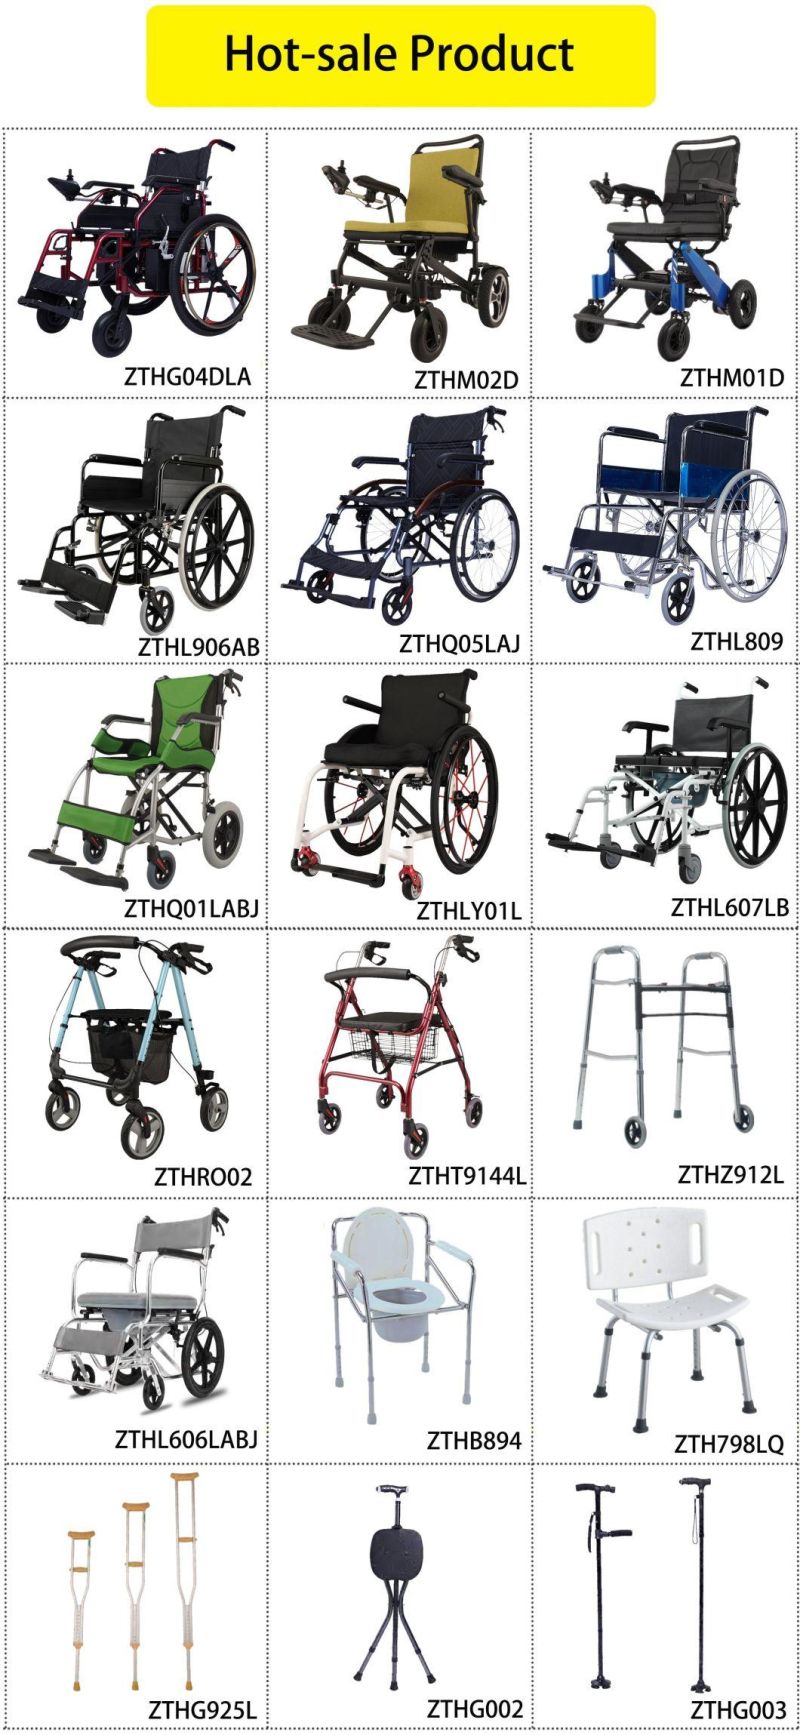 Zthl608 Apparatus Steel Aluminum Alloy Folding Electric OEM Customized Manual Disabled Light Elderly Accessibilitymotion Factory or Wheelchair